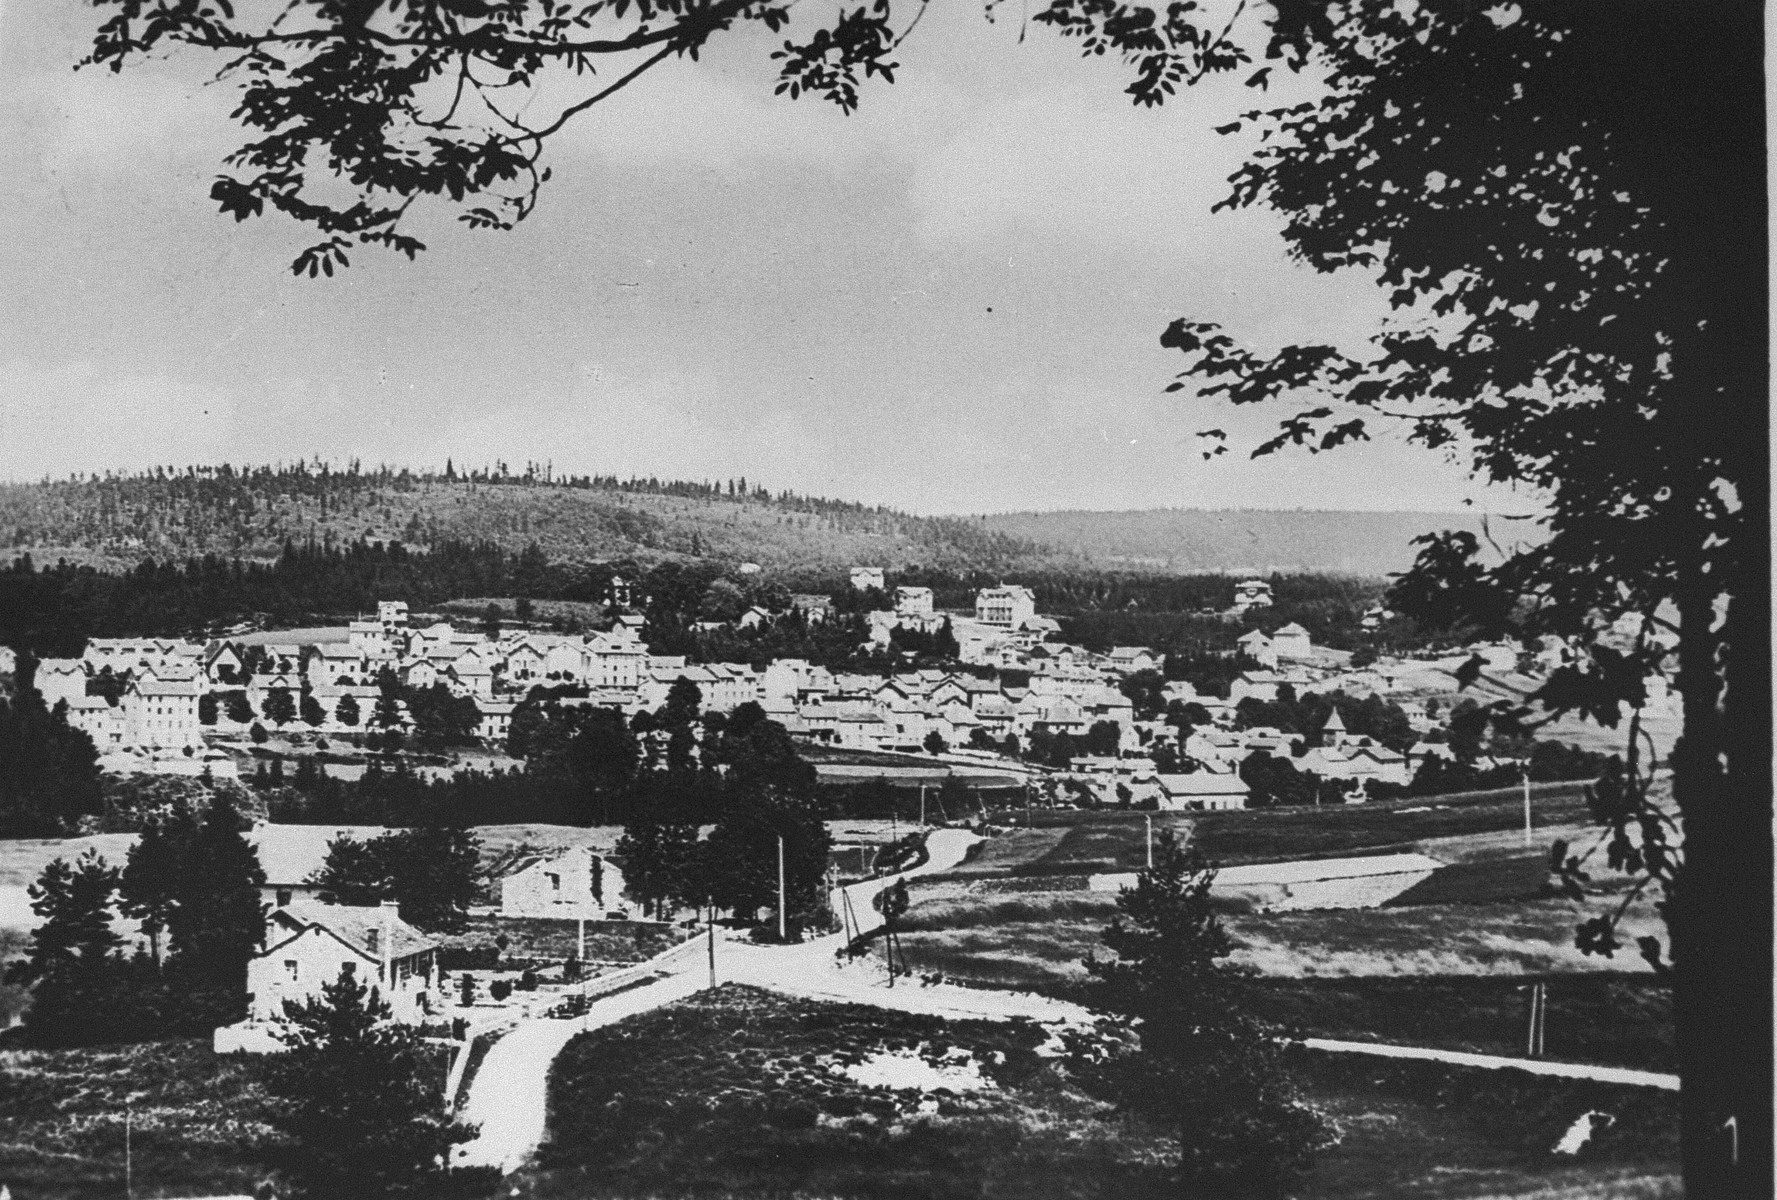 View of the French village of Le Chambon-sur-Lignon.